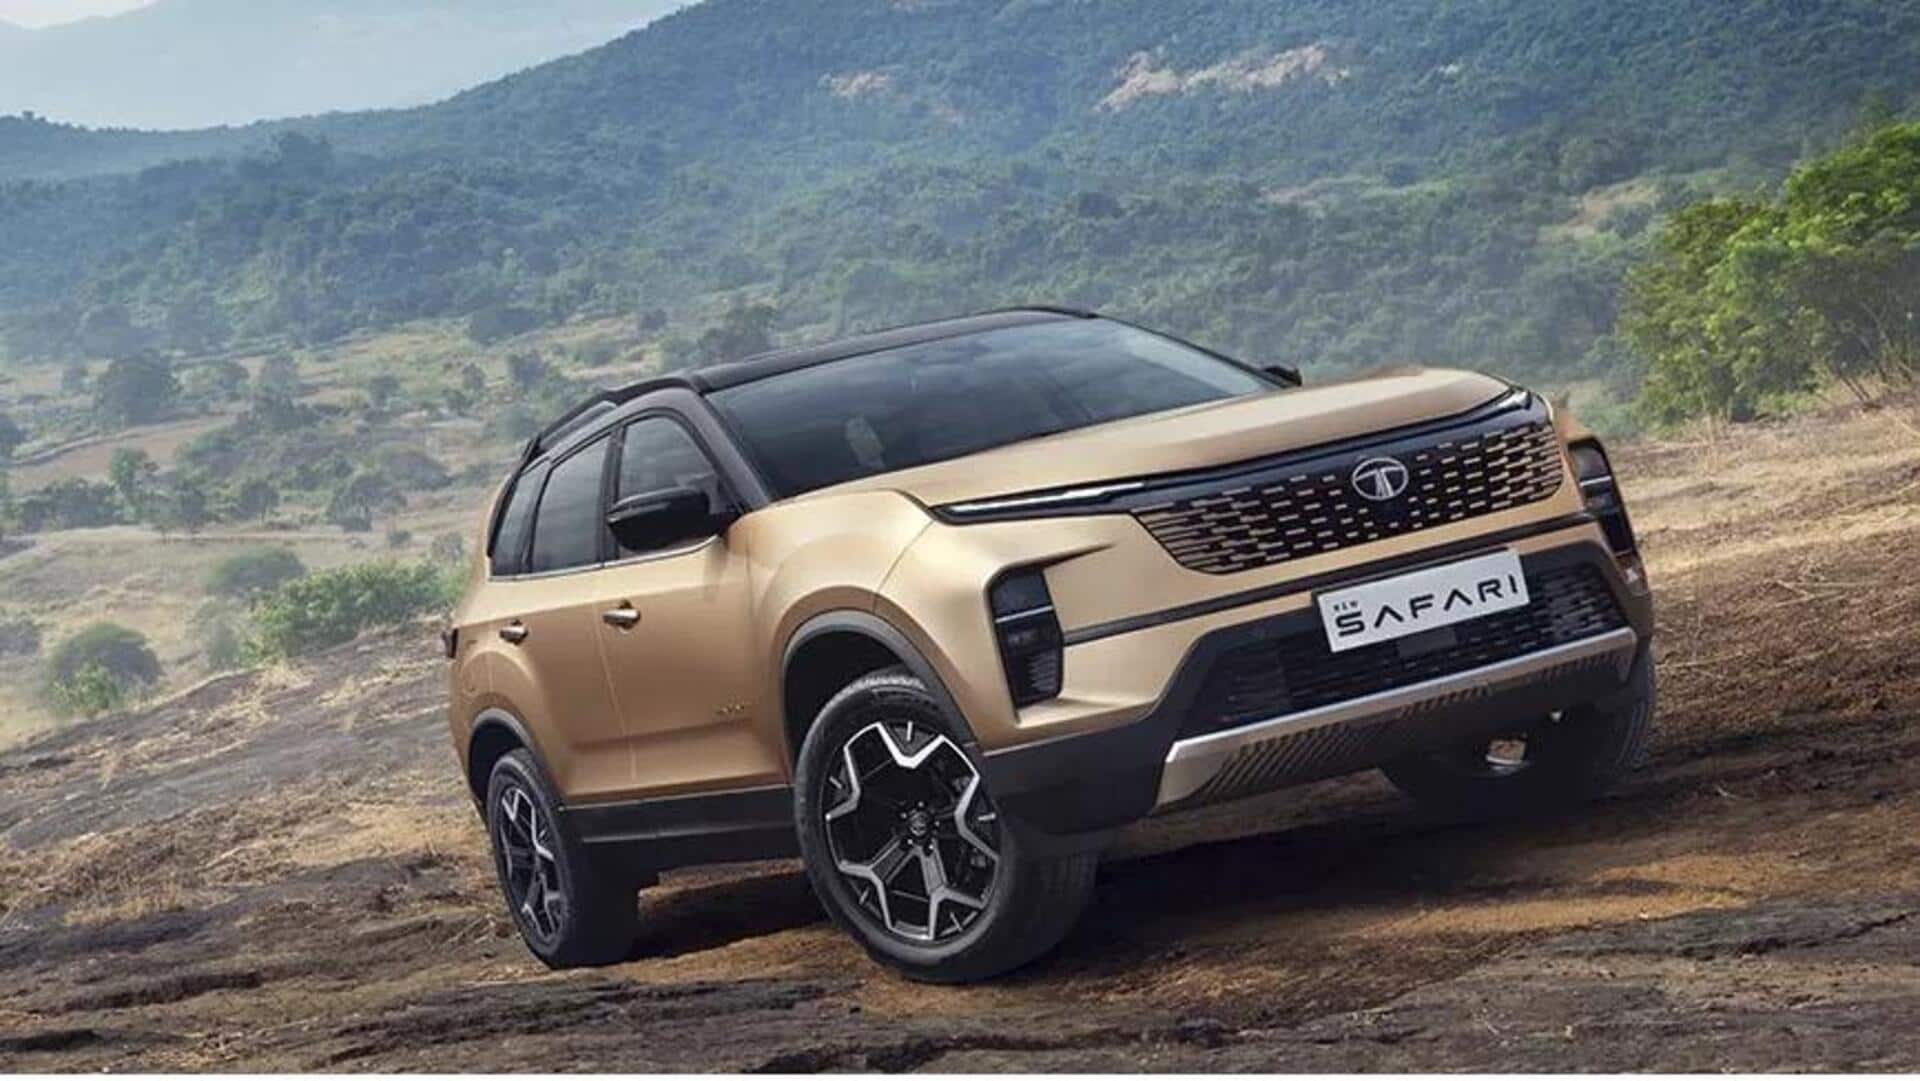 Tata Safari's waiting period reduced significantly: Check out top alternatives